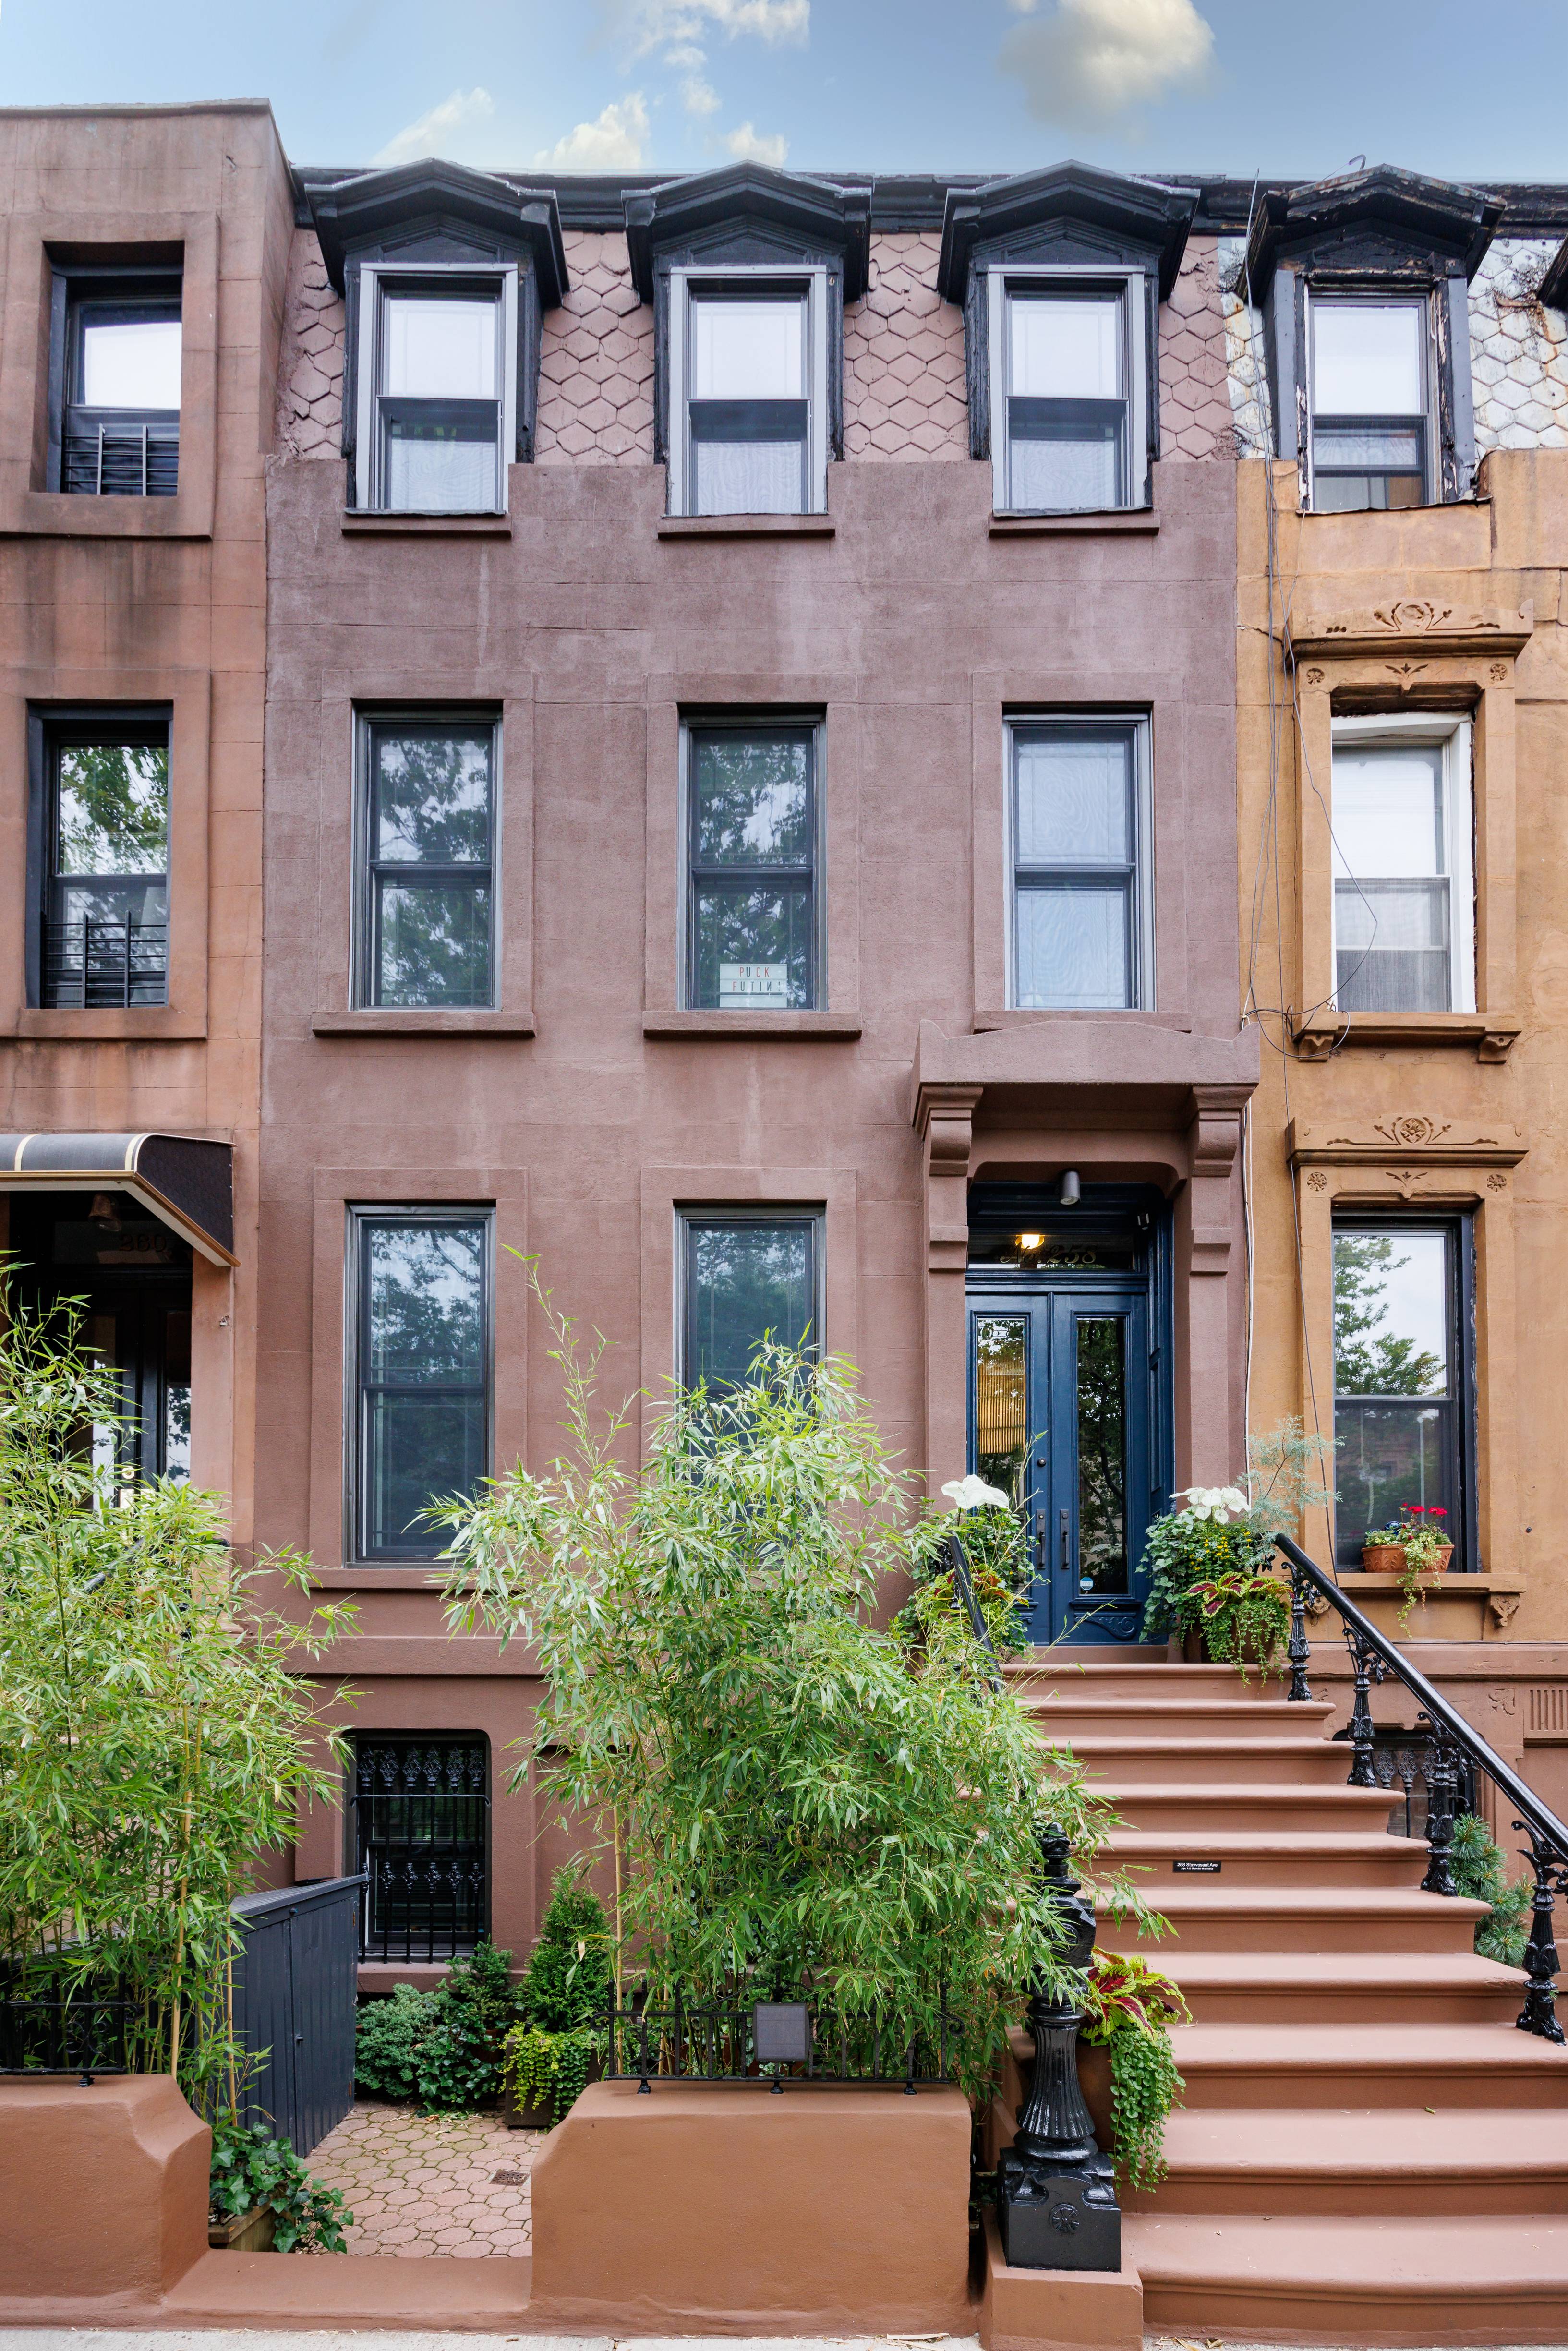 Fully restored Prime BedStuy 3 family townhome